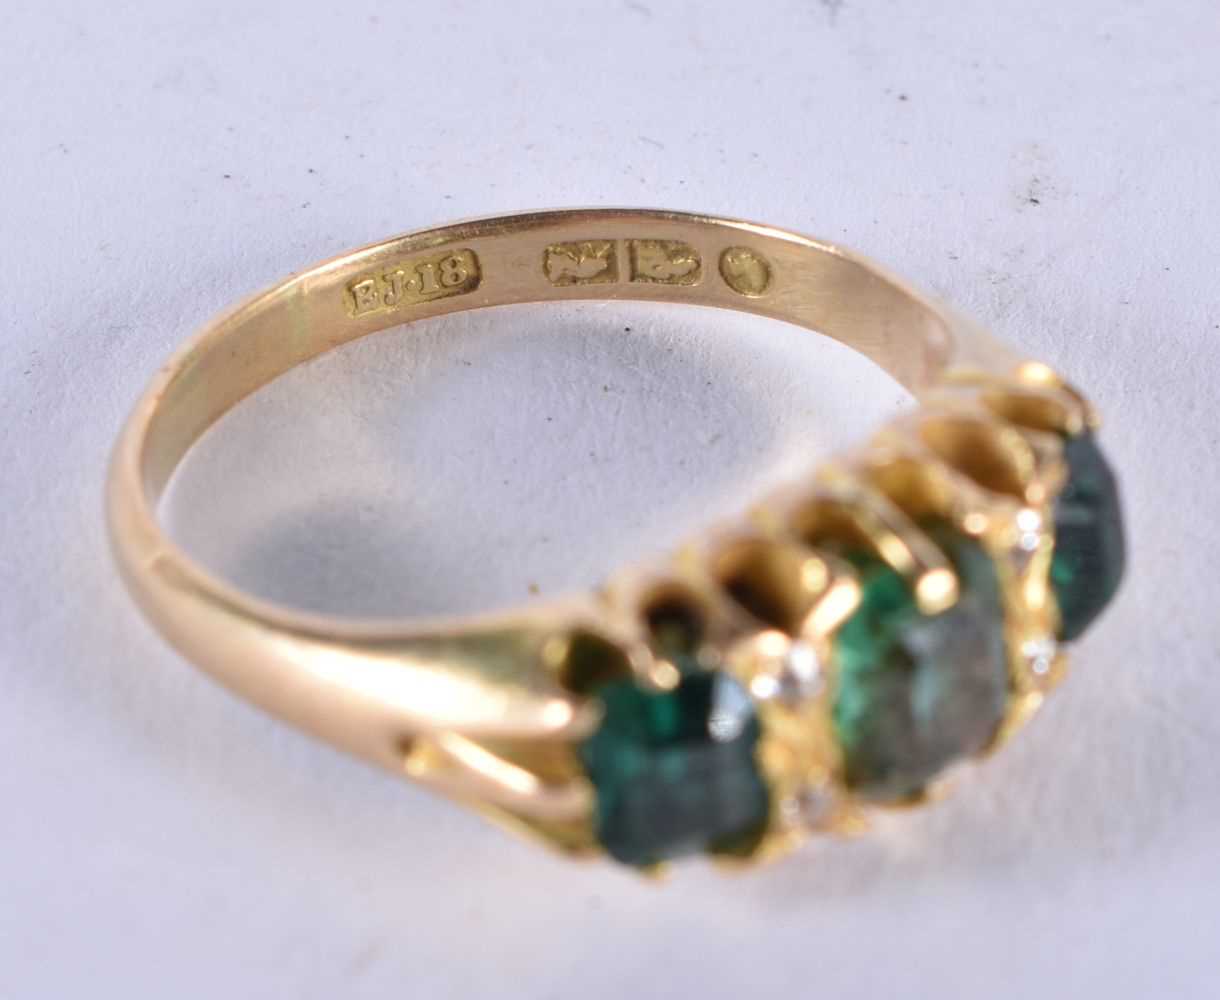 A VICTORIAN 18CT GOLD EMERALD AND DIAMOND RING. R. 4.3 grams. - Image 3 of 3